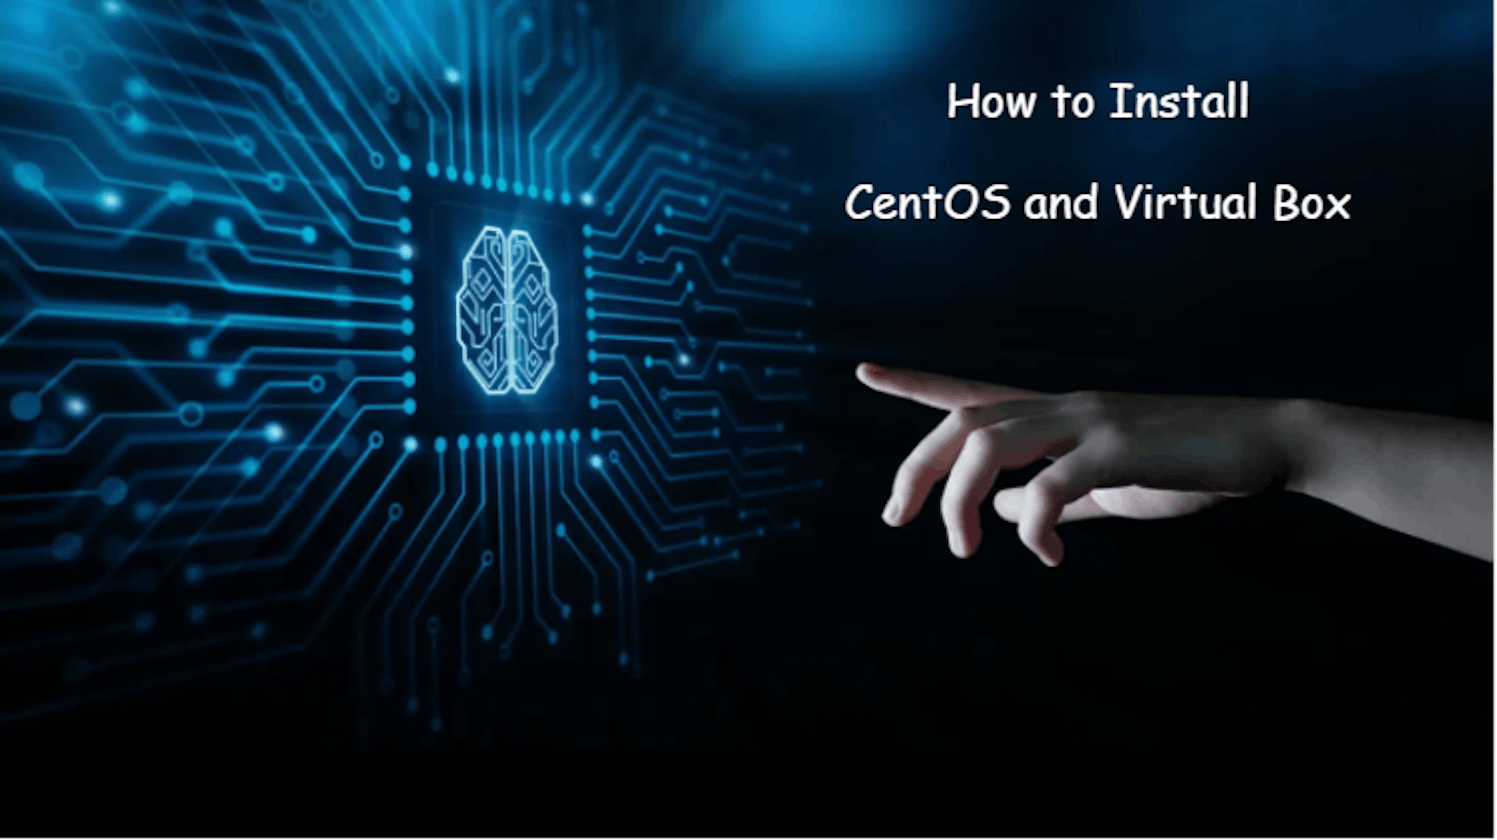 How to install CentOS and Virtual Box for DevOps journey